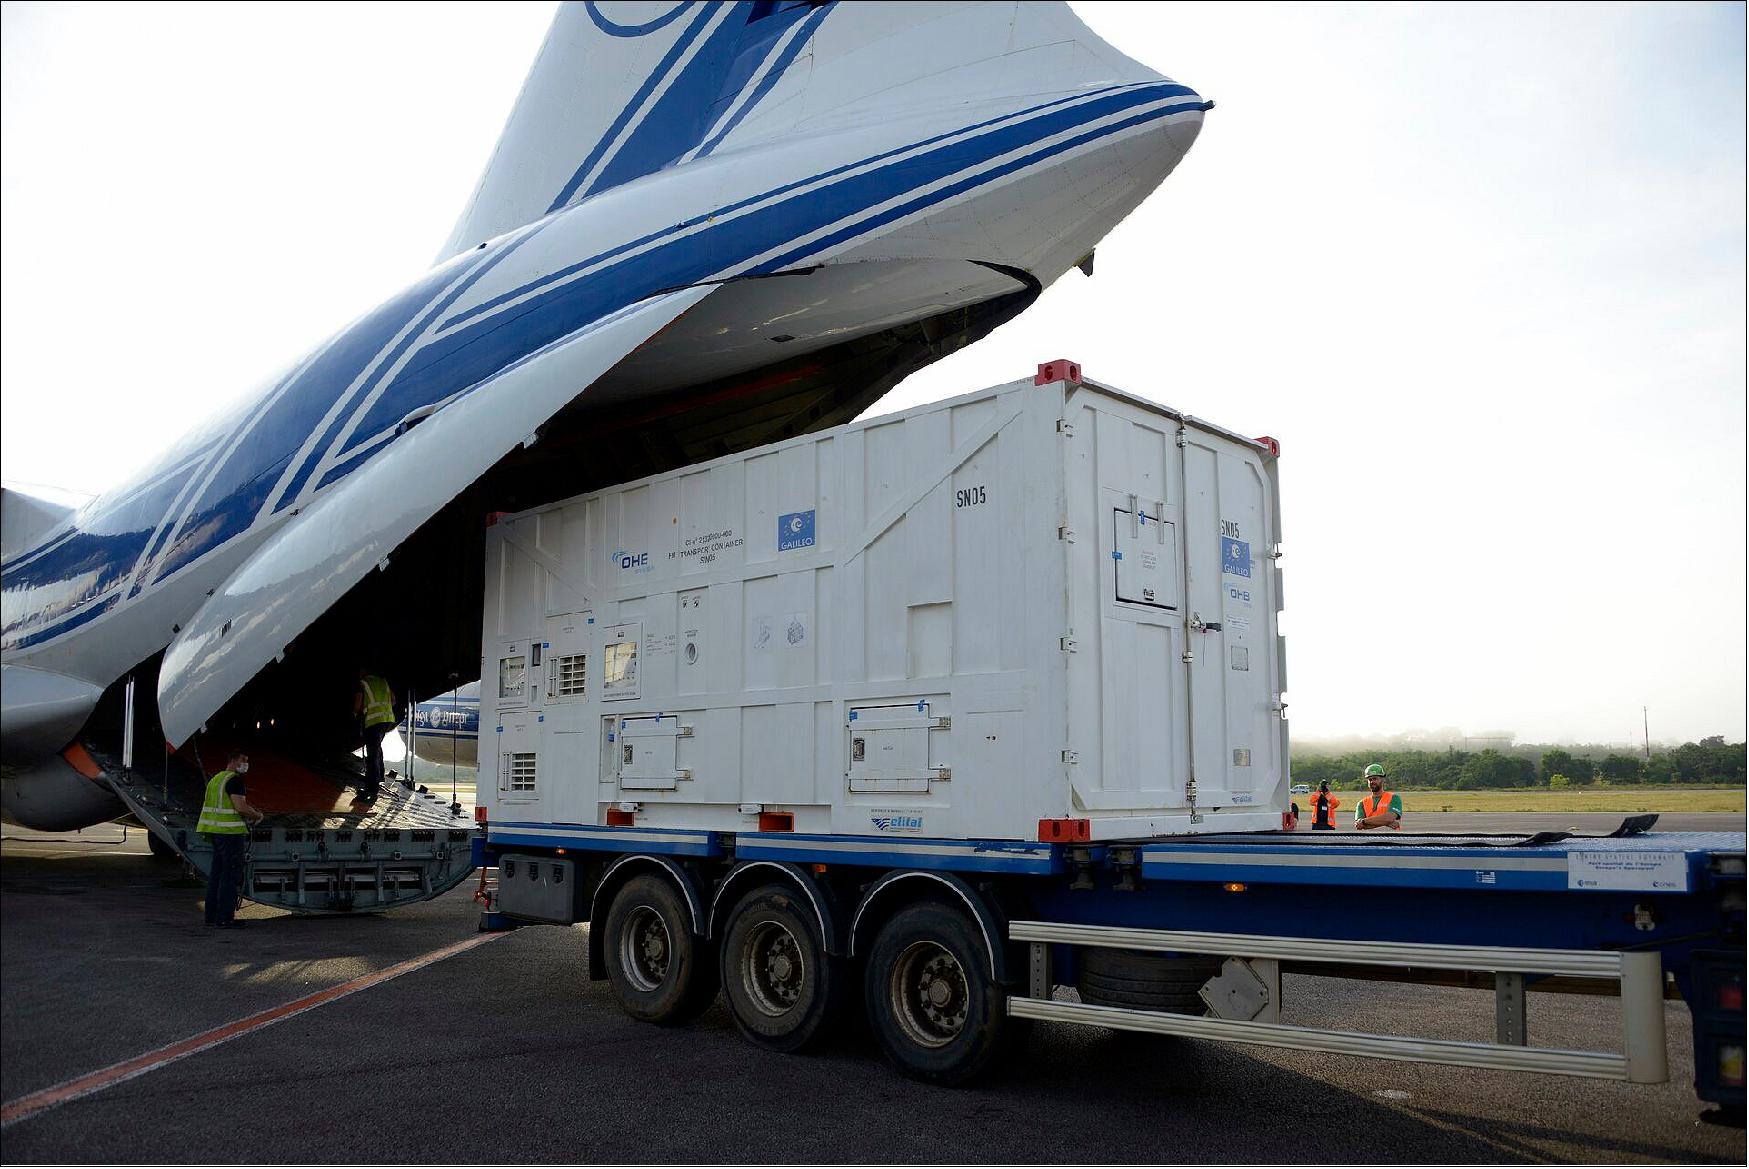 Figure 8: Loading Galileo satellite aboard lorry. Flown from Liège Airport in Belgium on an Ilyushin cargo carrier, Galileo satellites 27-28 touched down in Cayenne – Félix Eboué Airport in the evening of 6 October 2020. The two satellites, each in their own transport container, were placed on lorries and driven to Europe's Spaceport (image credit: ESA, P. Muller)